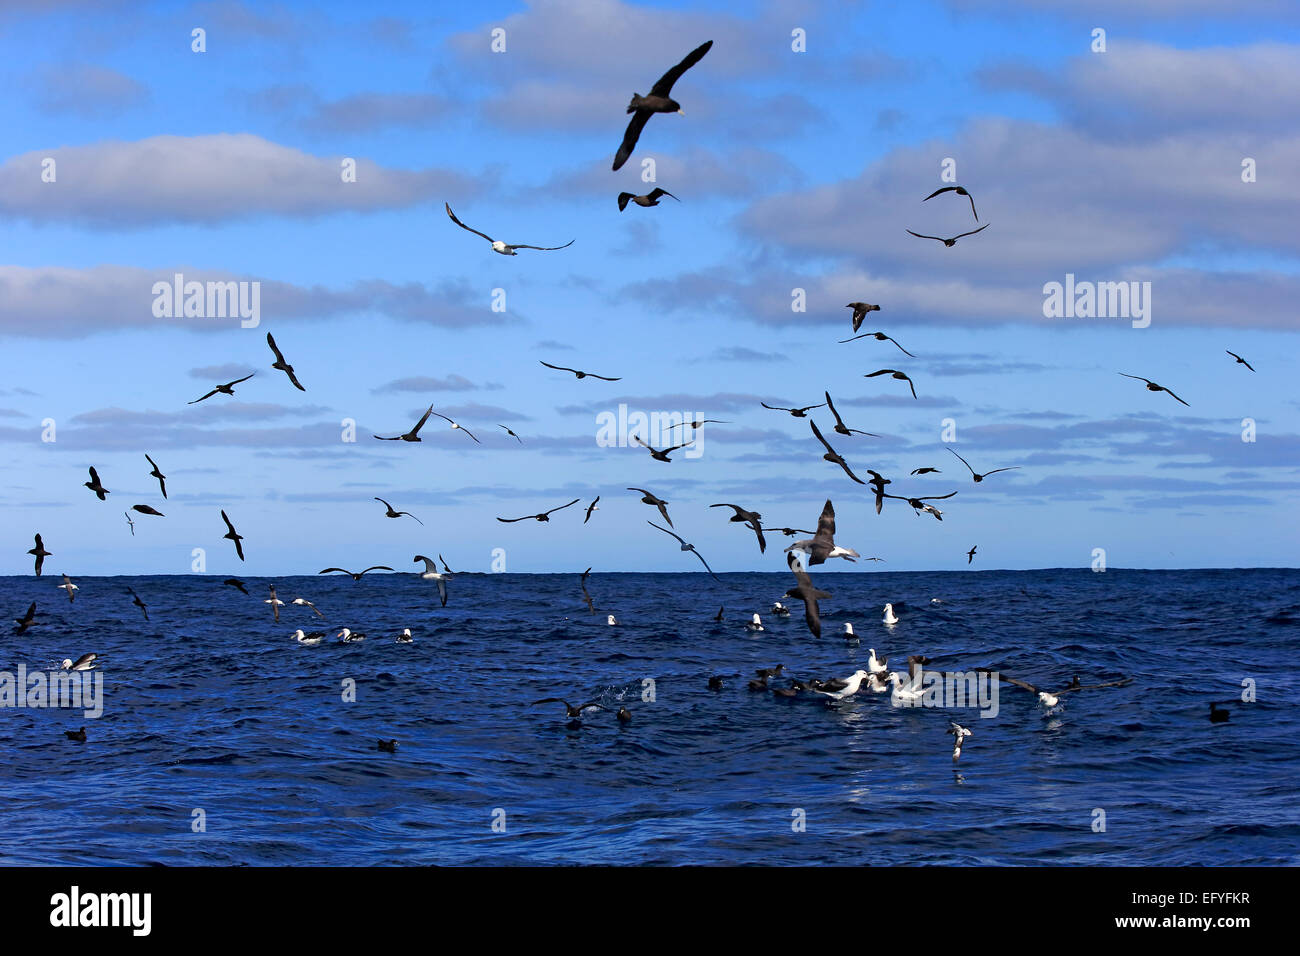 Black-browed albatrosses (Thalassarche melanophrys) and white chin petrels (Procellaria aequinoctialis), adult, flying Stock Photo